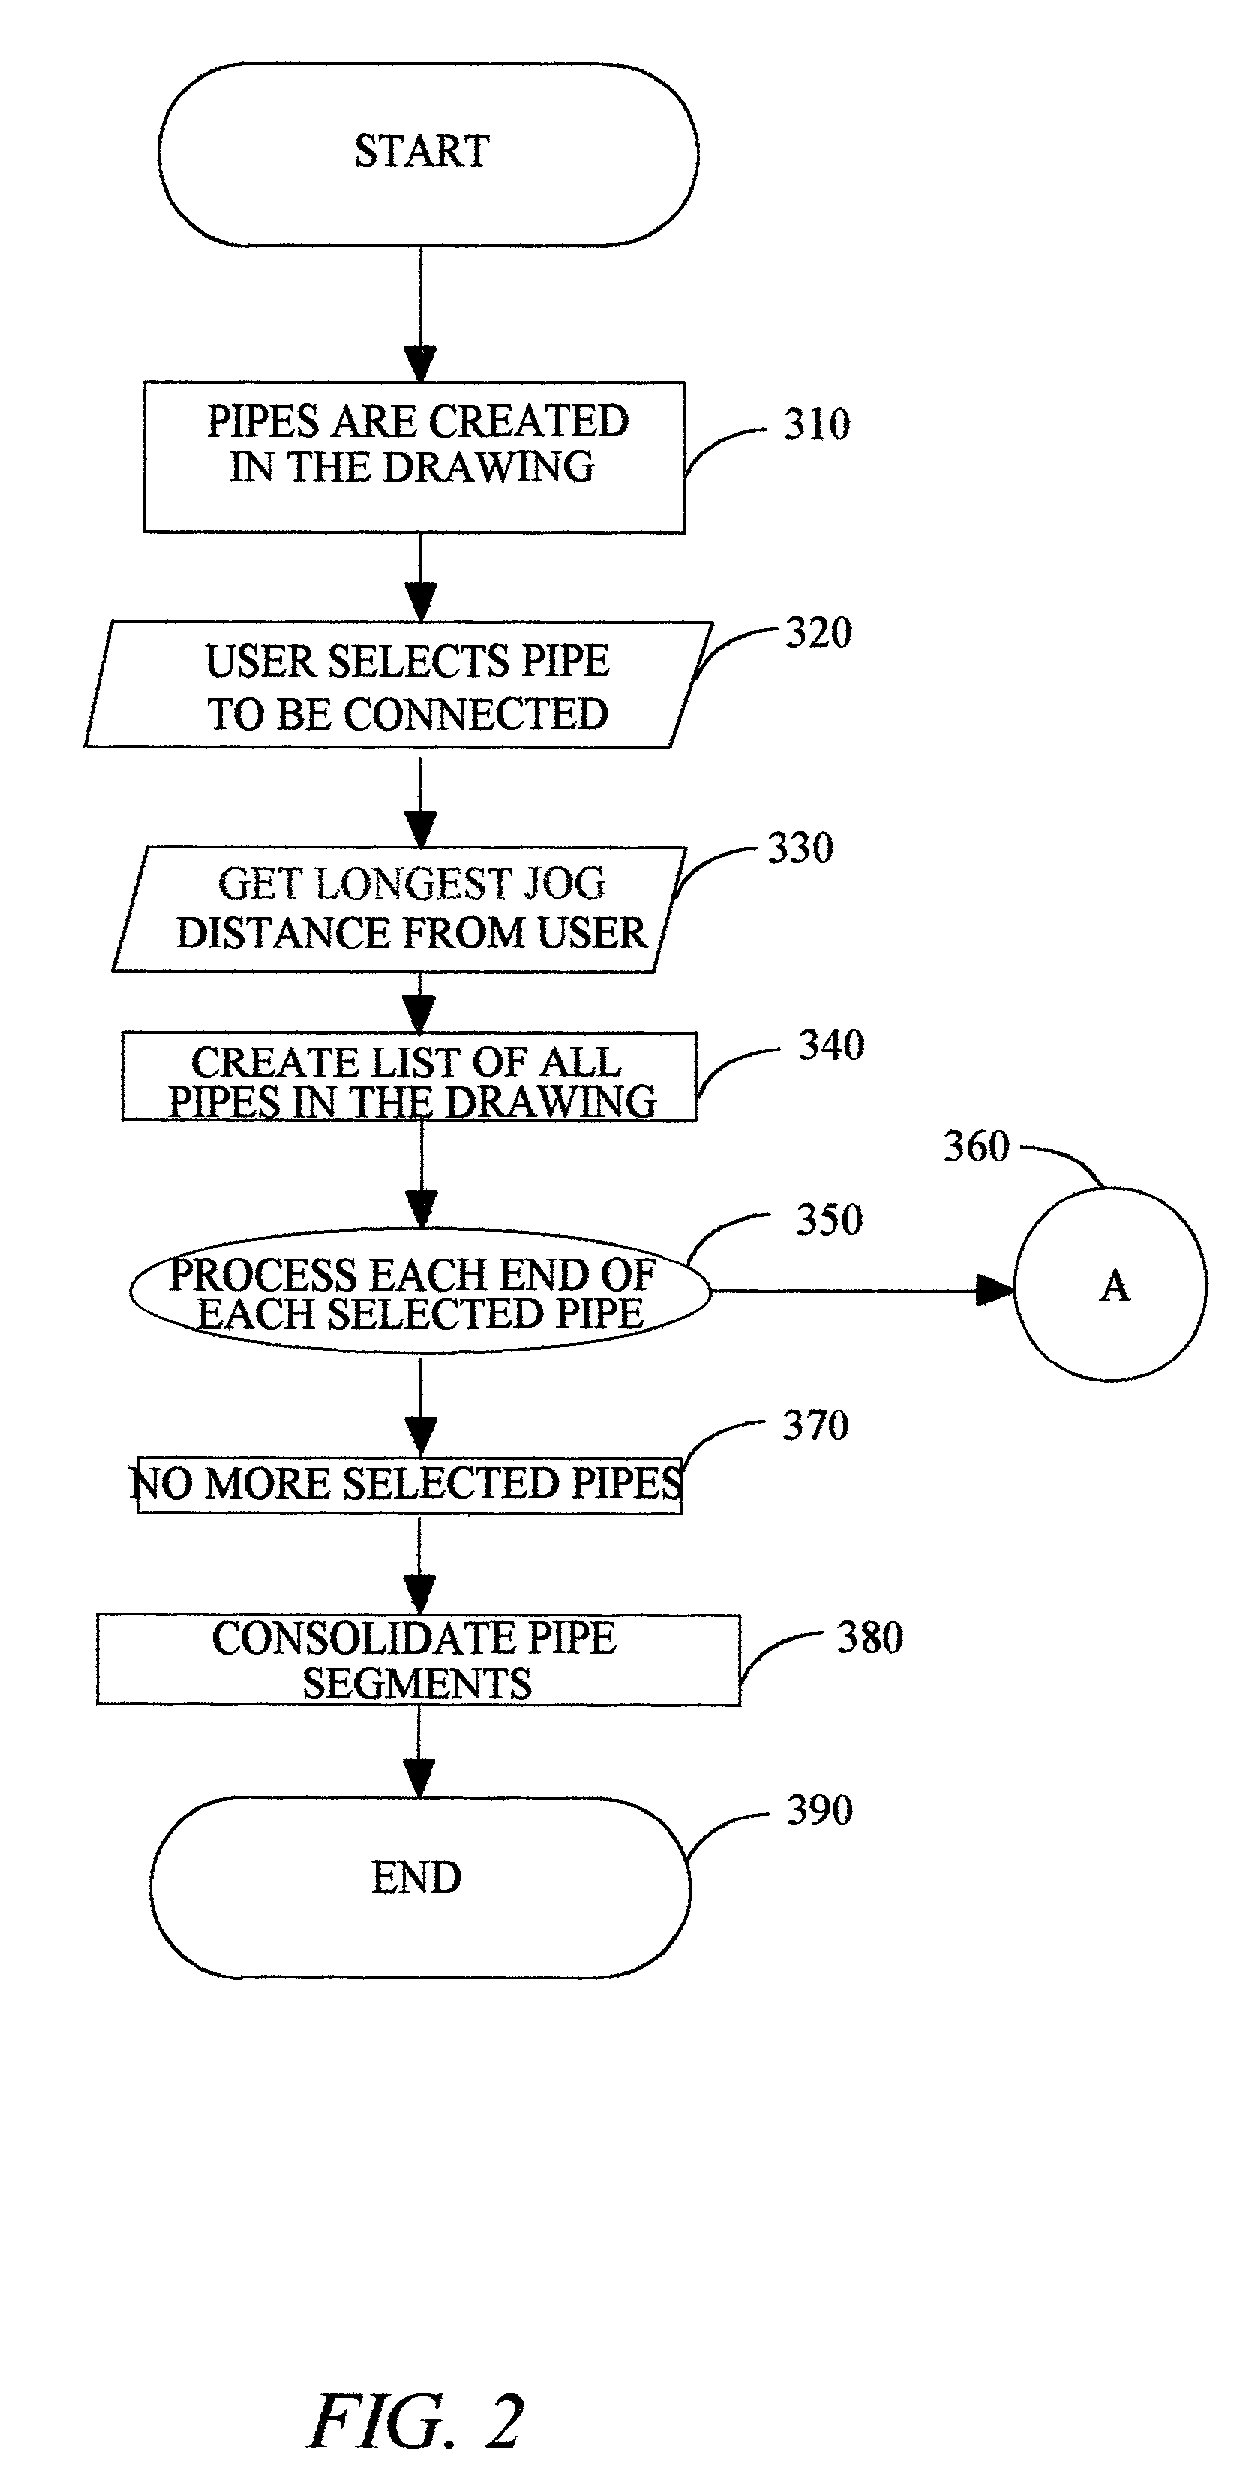 Computer-assisted-design of piping swing-joint intersections